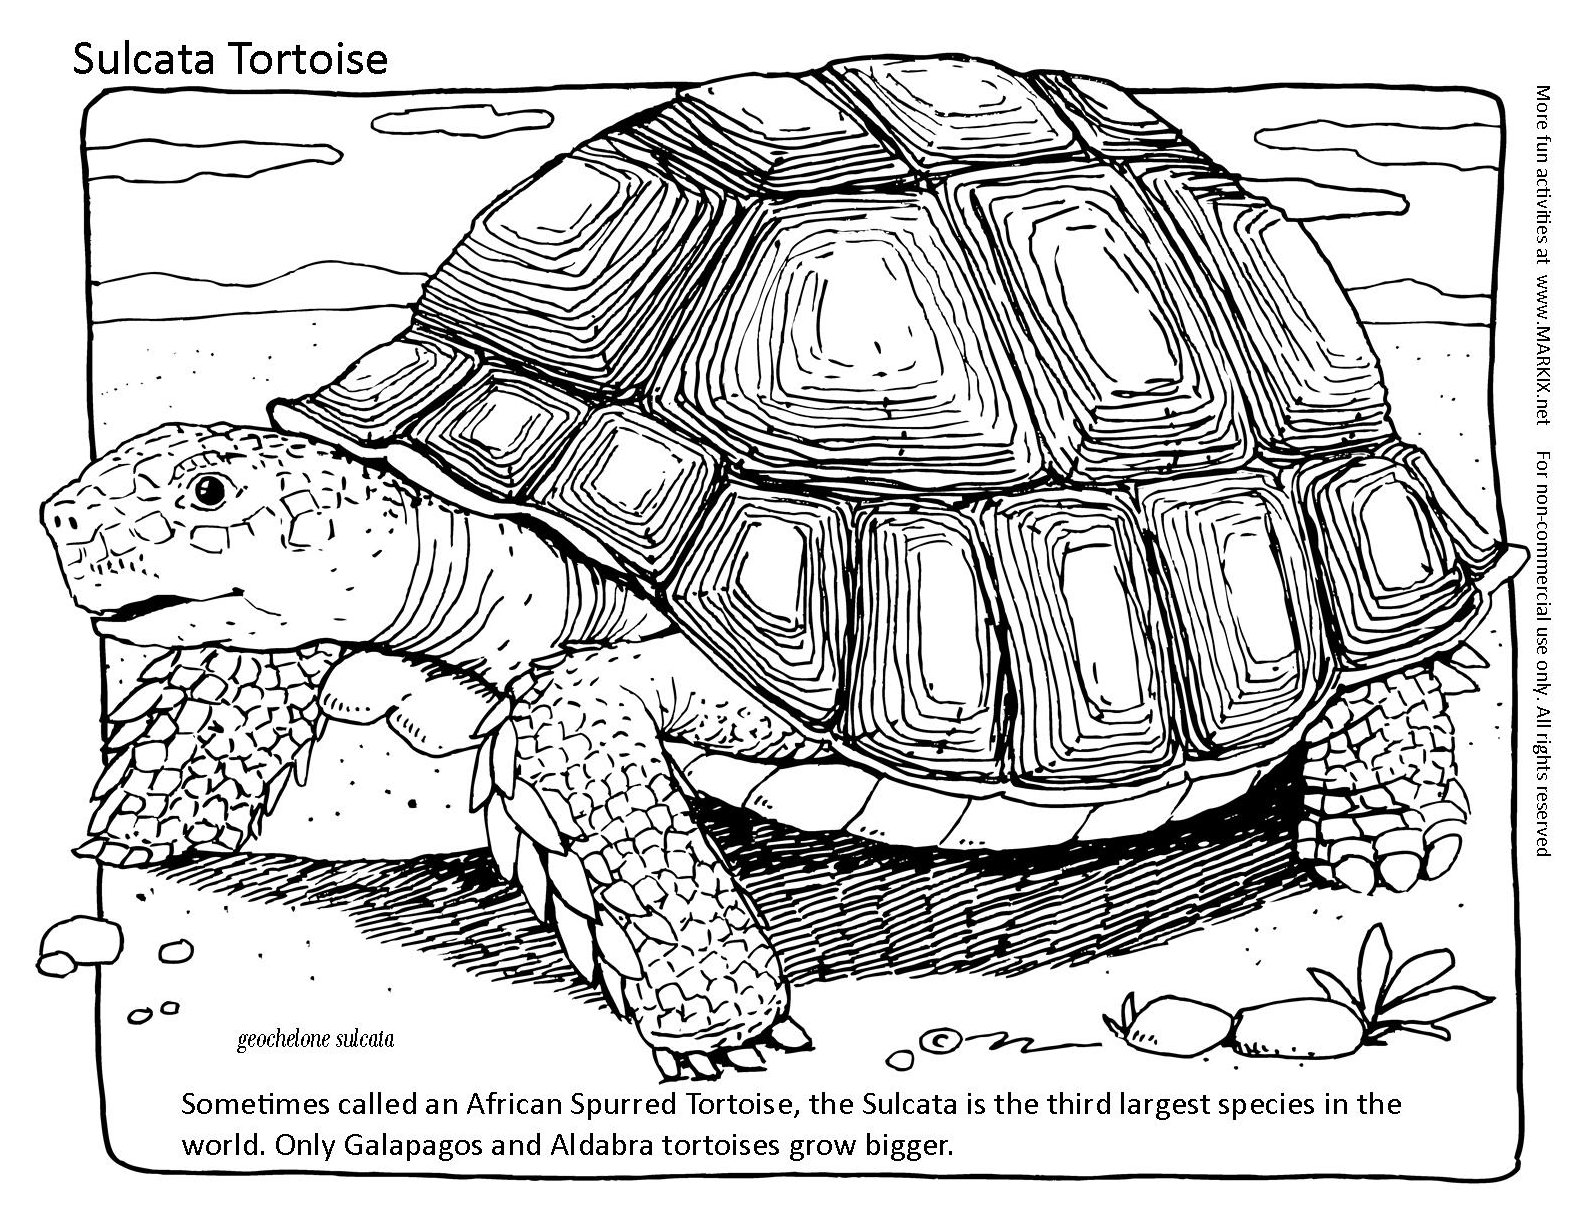 Tortoise Coloring Page. Sometimes called an African Spurred Tortoise, the Sulcata is the third largest species in the world. Only Galapagos and Aldabra tortoises grow bigger.